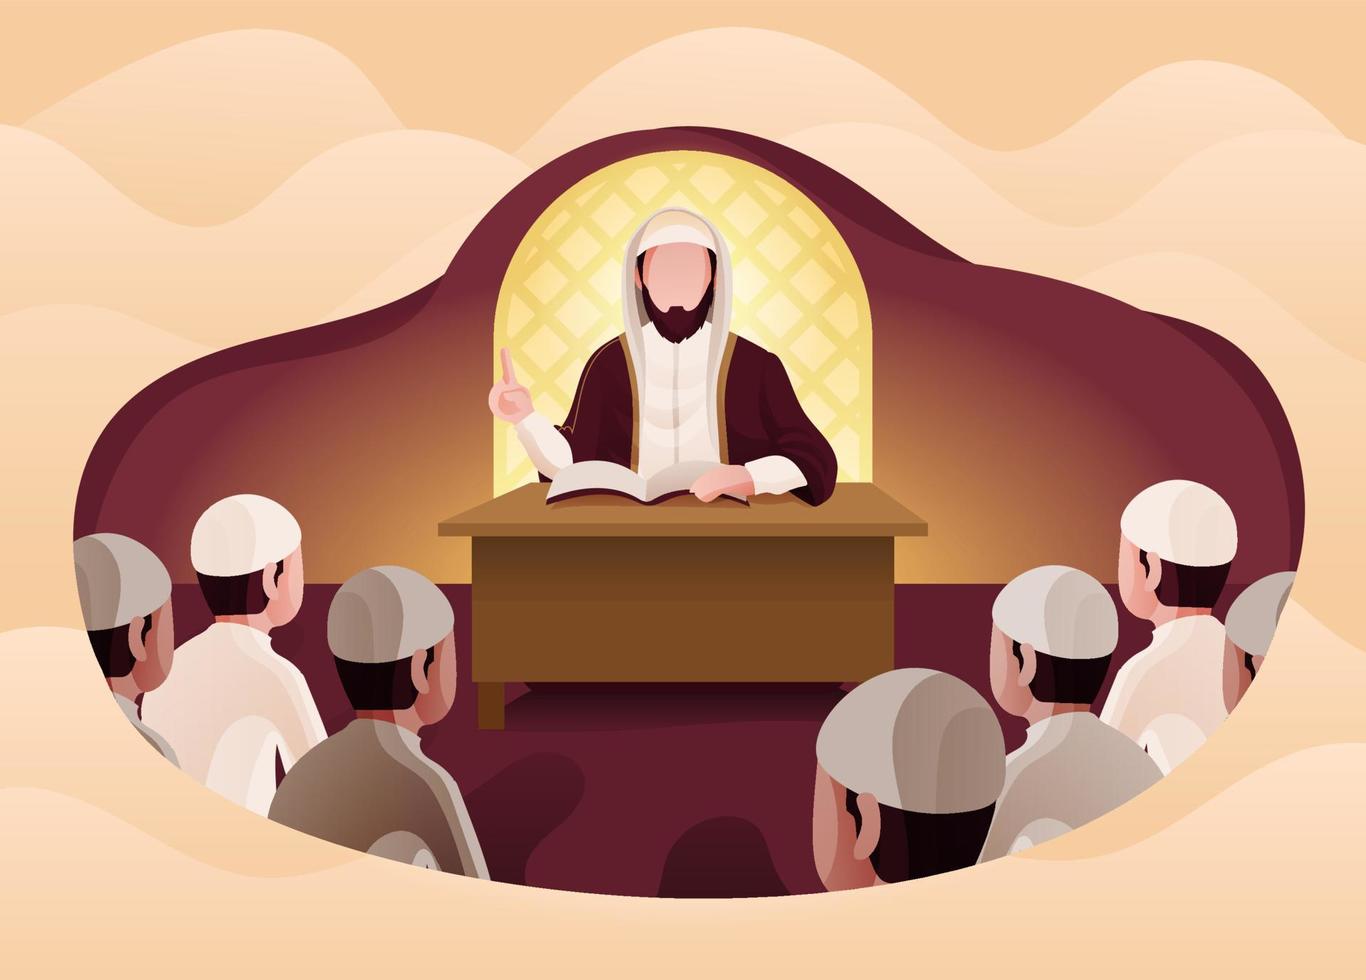 Arab Muslim or Moslem Scholar Teaching in Front of Audience in Mosque Cartoon Illustration vector